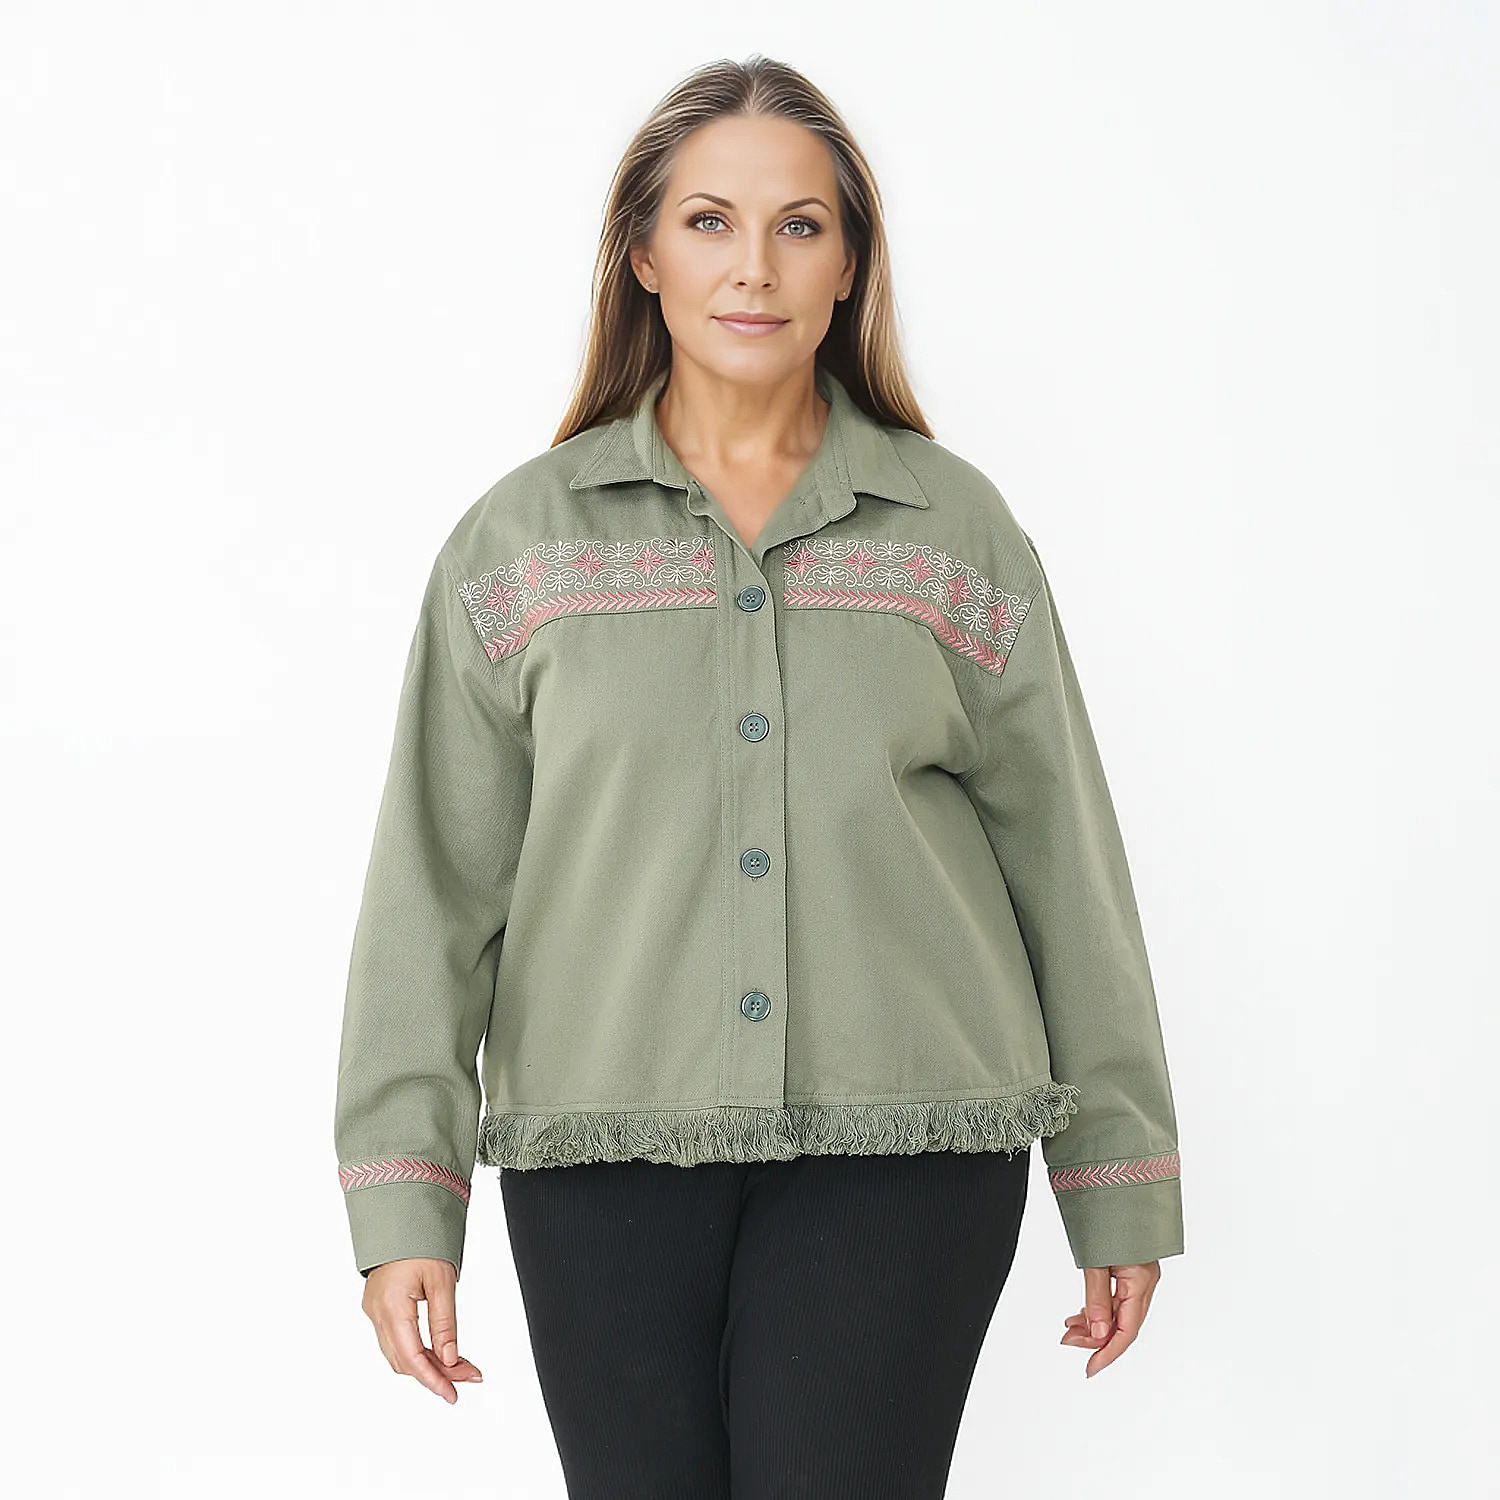 Tamsy 100% Cotton Embroidered Jacket (Size M,12-14) - Moss Green